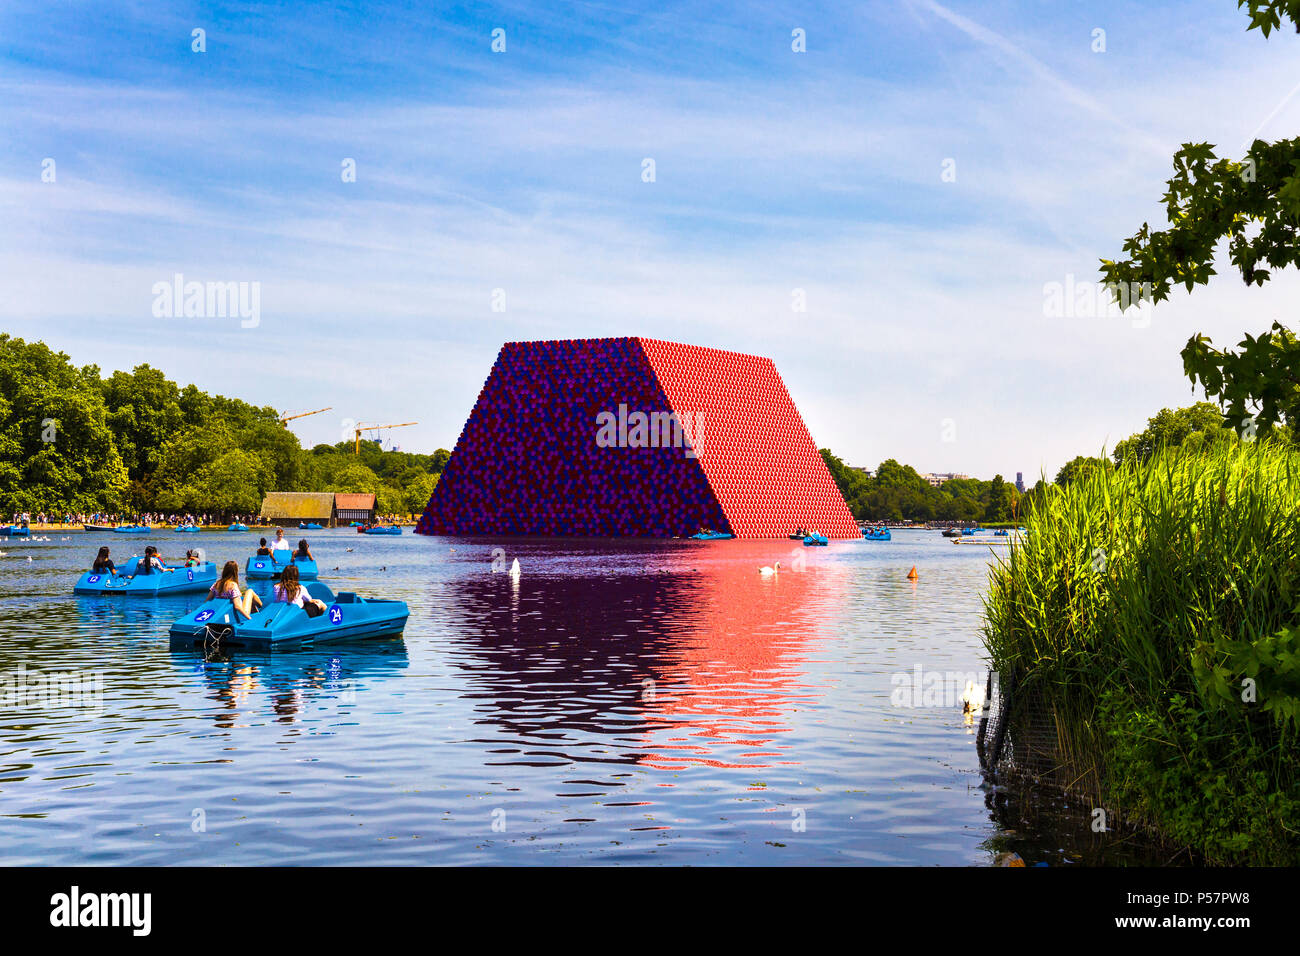 June 2018 - The Mastaba sculpture by Christo and Jeanne-Claude floating in the Serpentine Lake in Hyde Park, London, UK Stock Photo